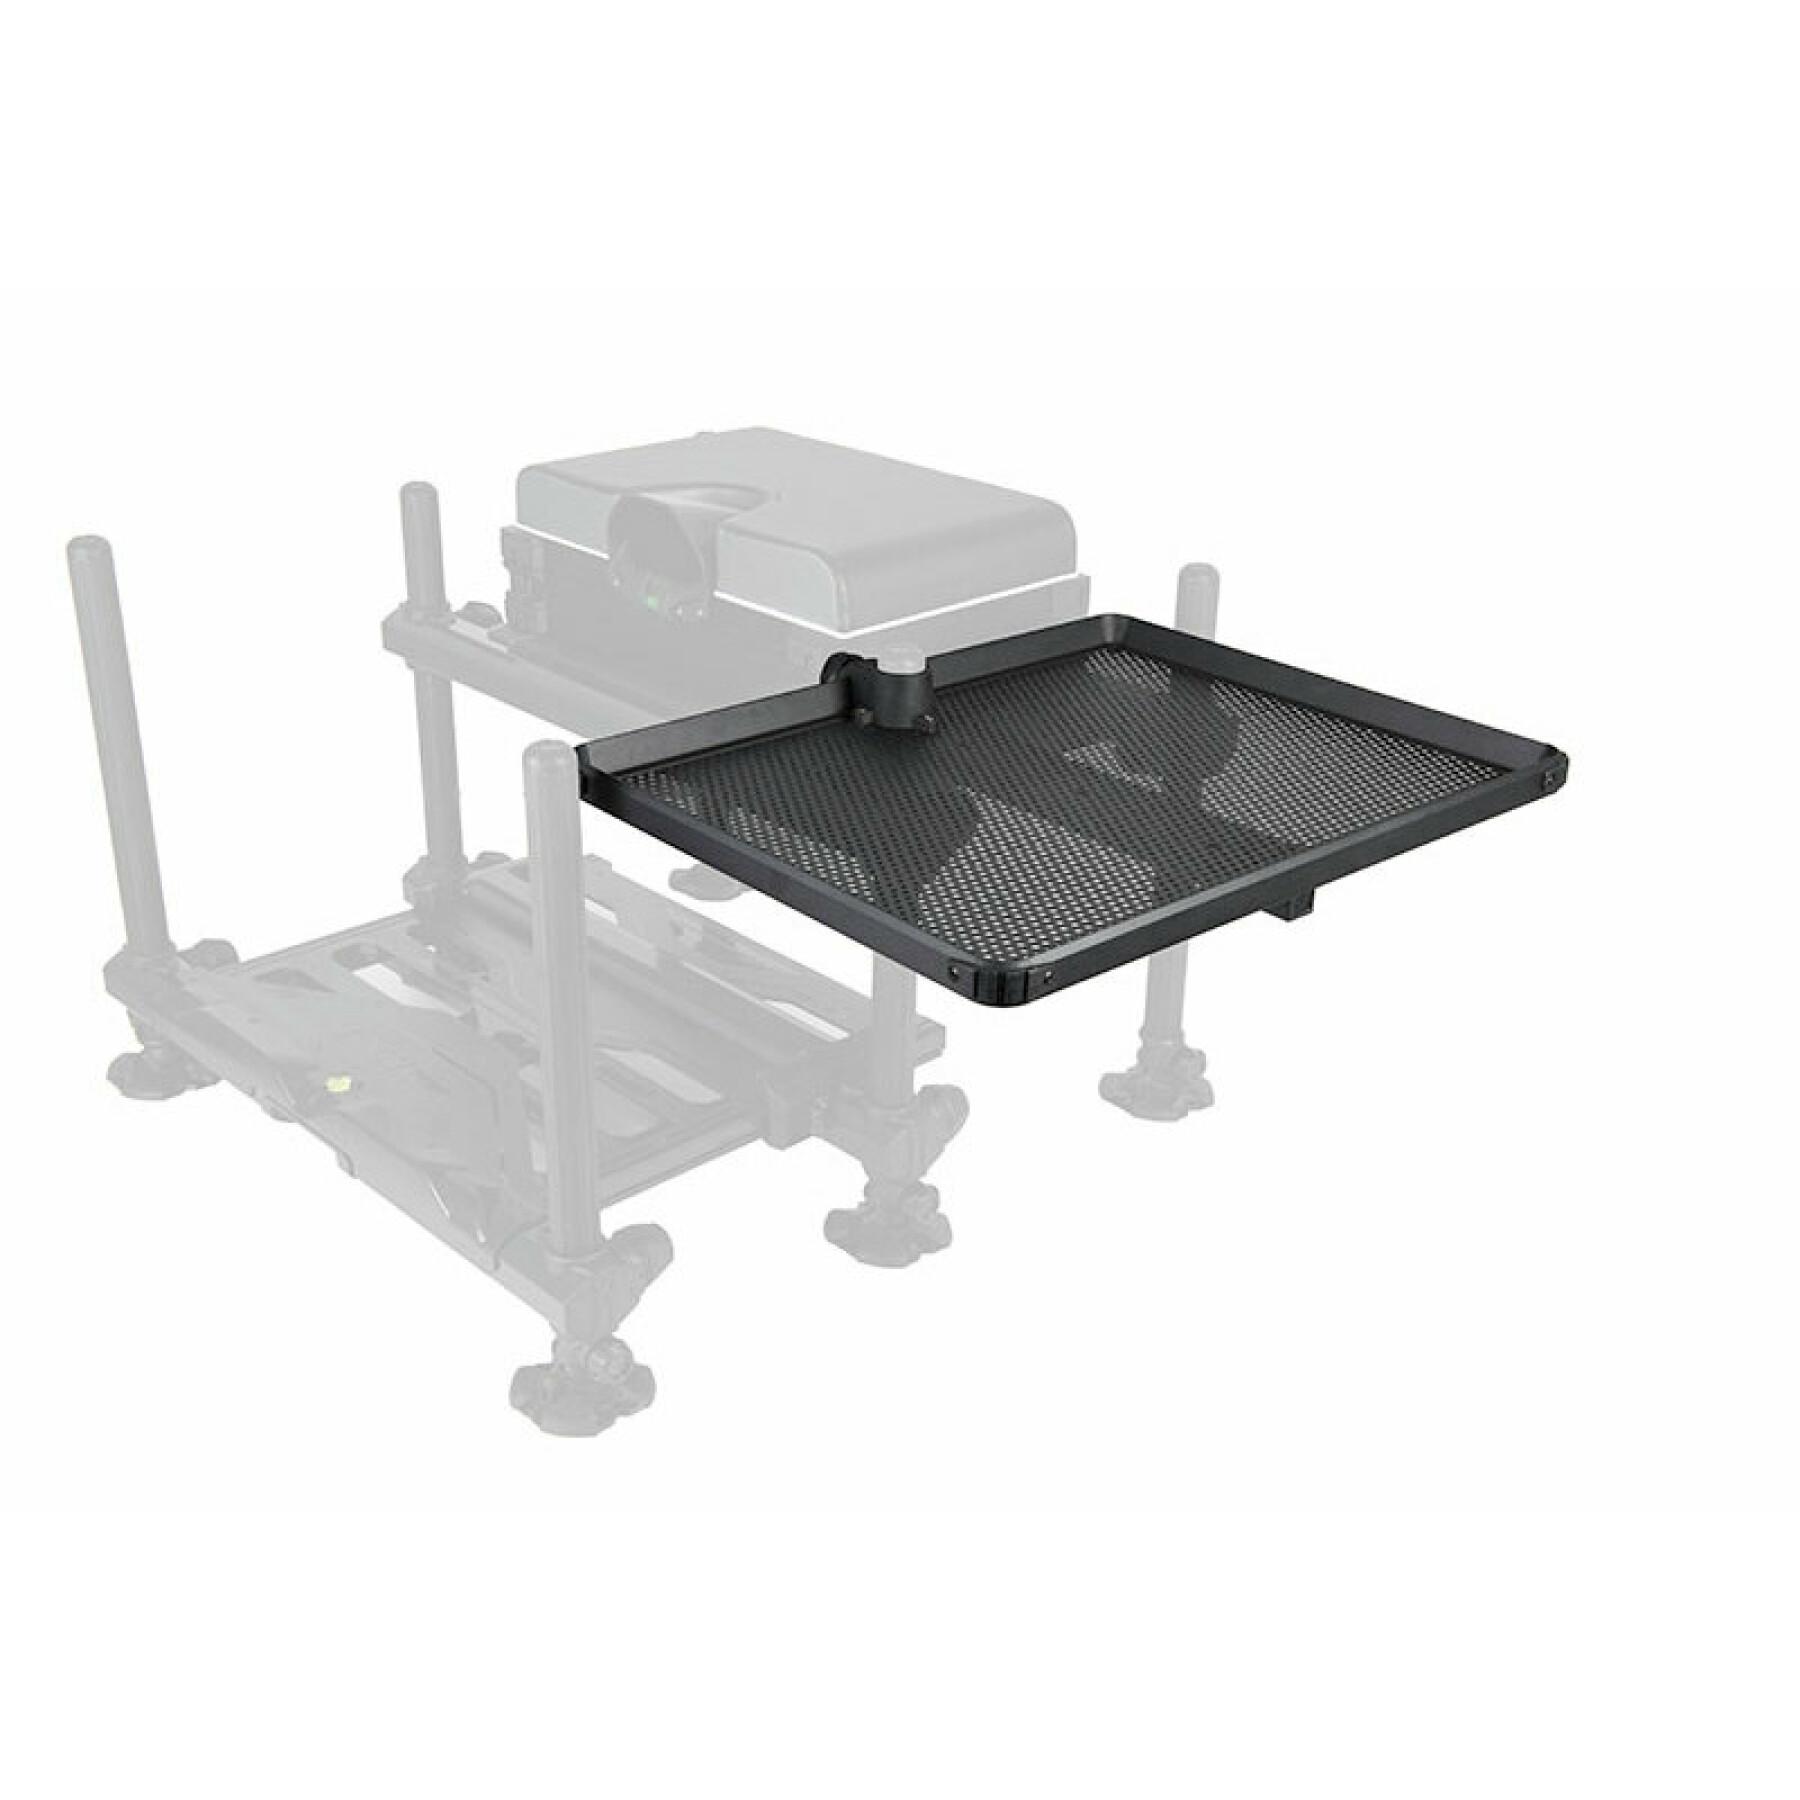 Self-supporting side tray Matrix